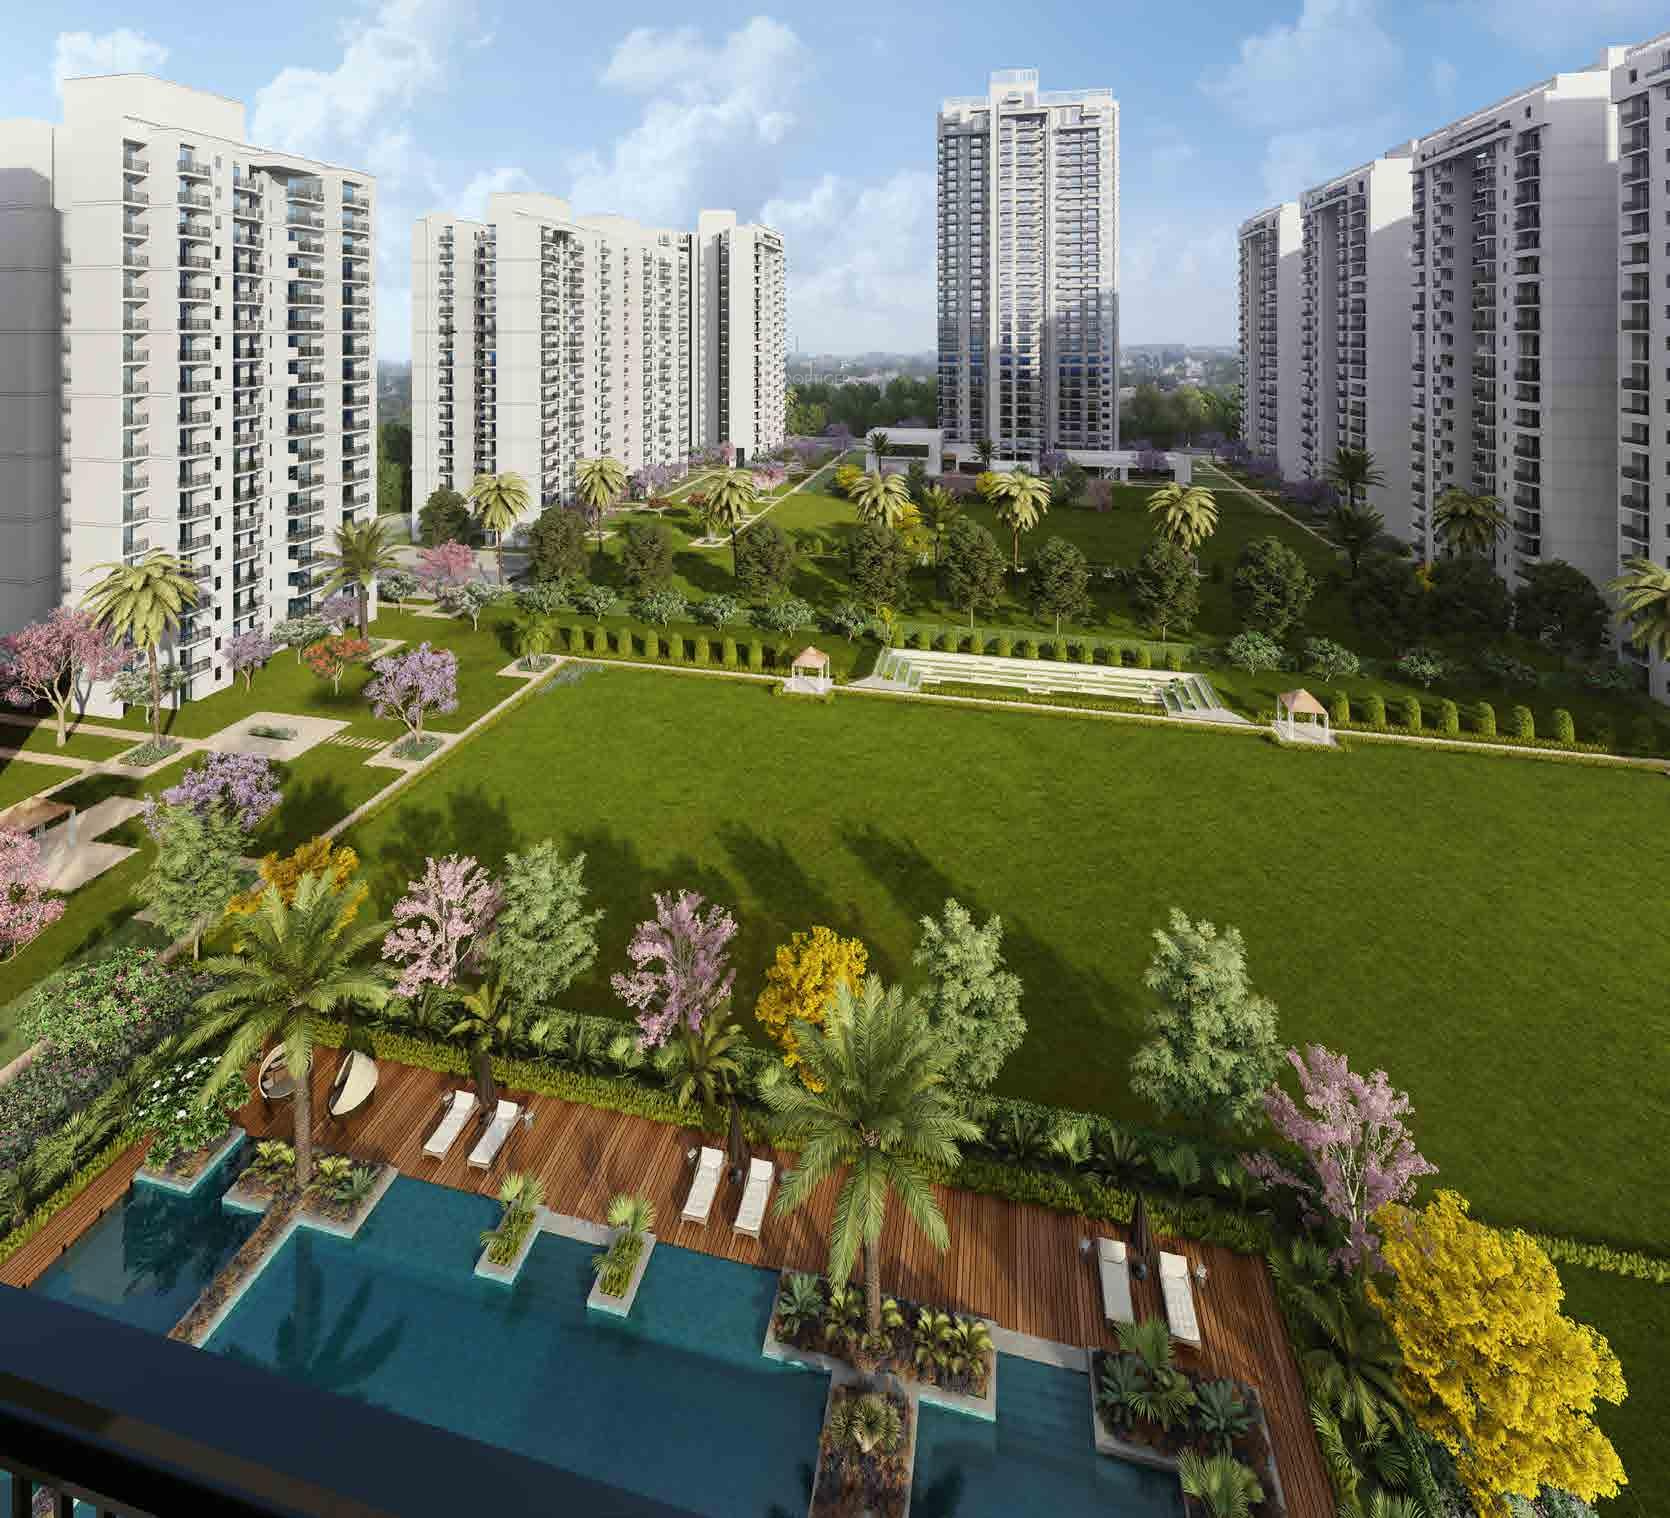 4 Bedroom Apartment for sale in Godrej tropical isle area 3250 sq ft Noida